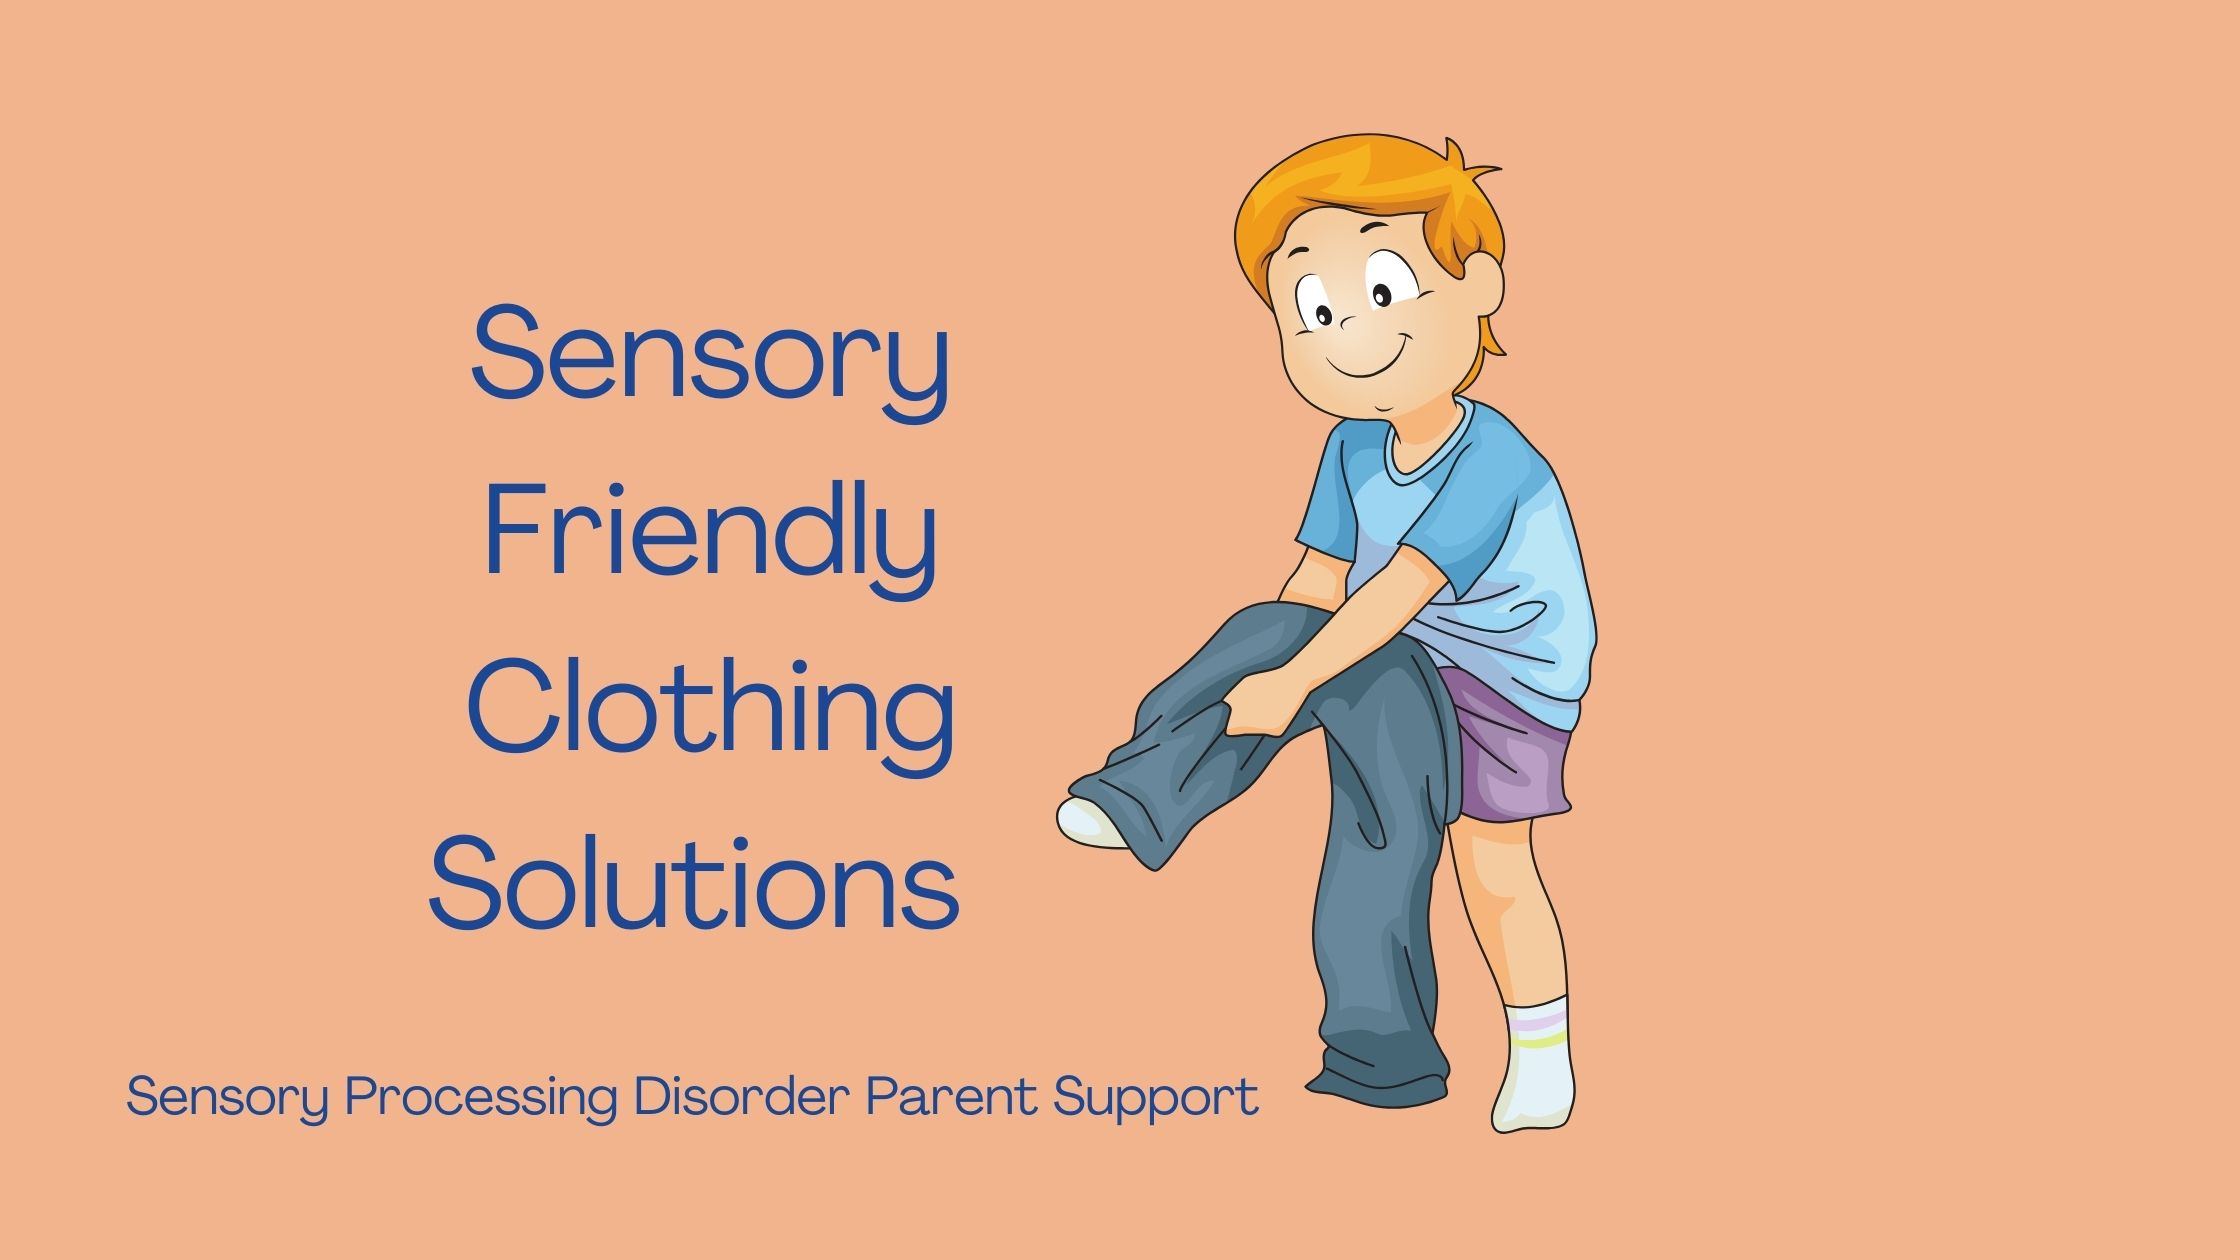 child with sensory processing disorder struggling to put on pants because of his sensory issues Sensory Friendly Clothing Solutions